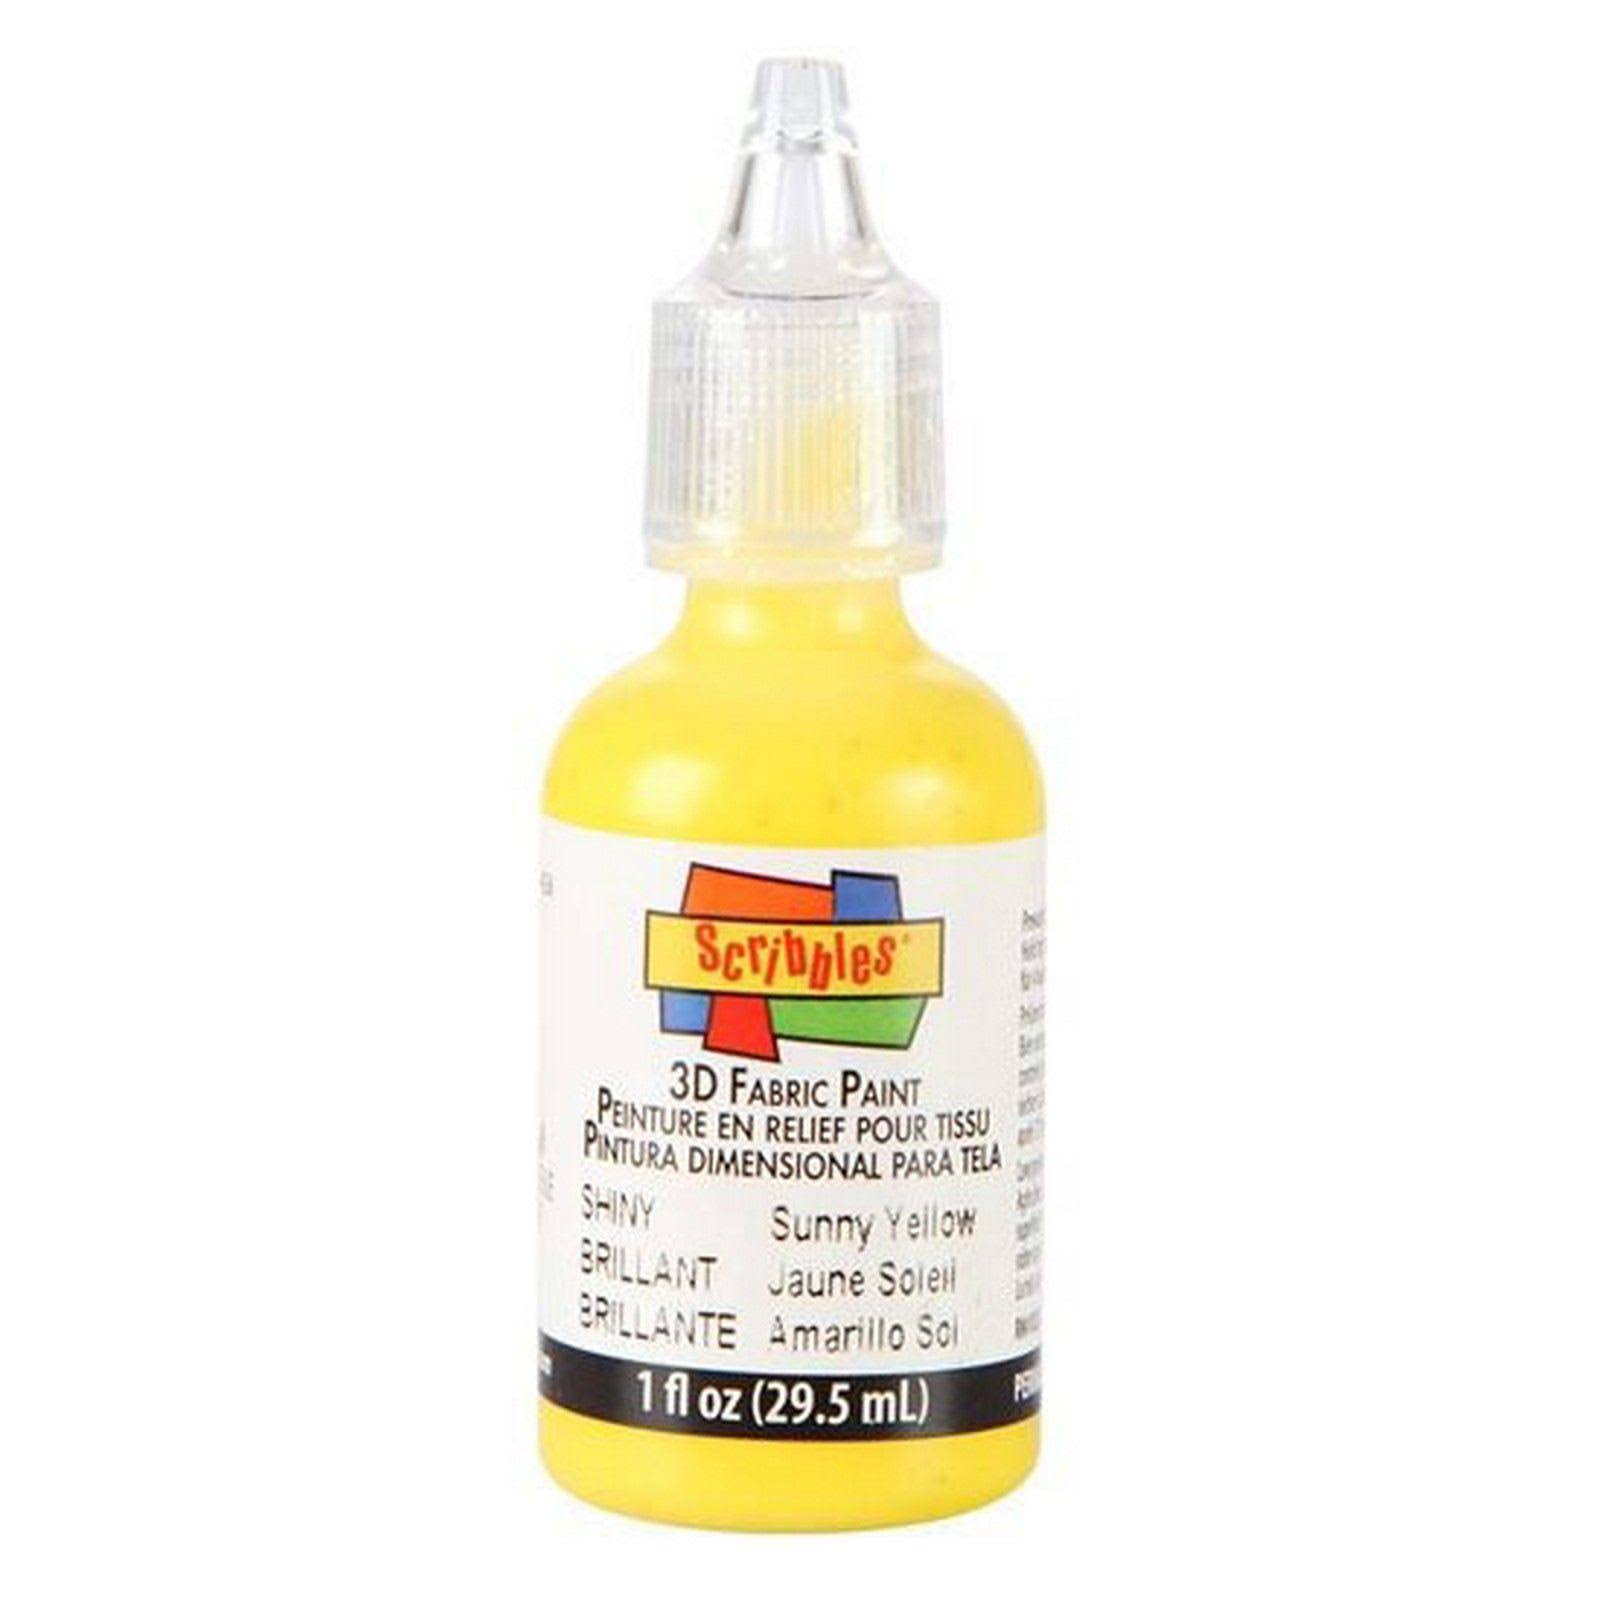 Scribbles 3D Fabric Paint 1 oz. Shiny Sunny Yellow